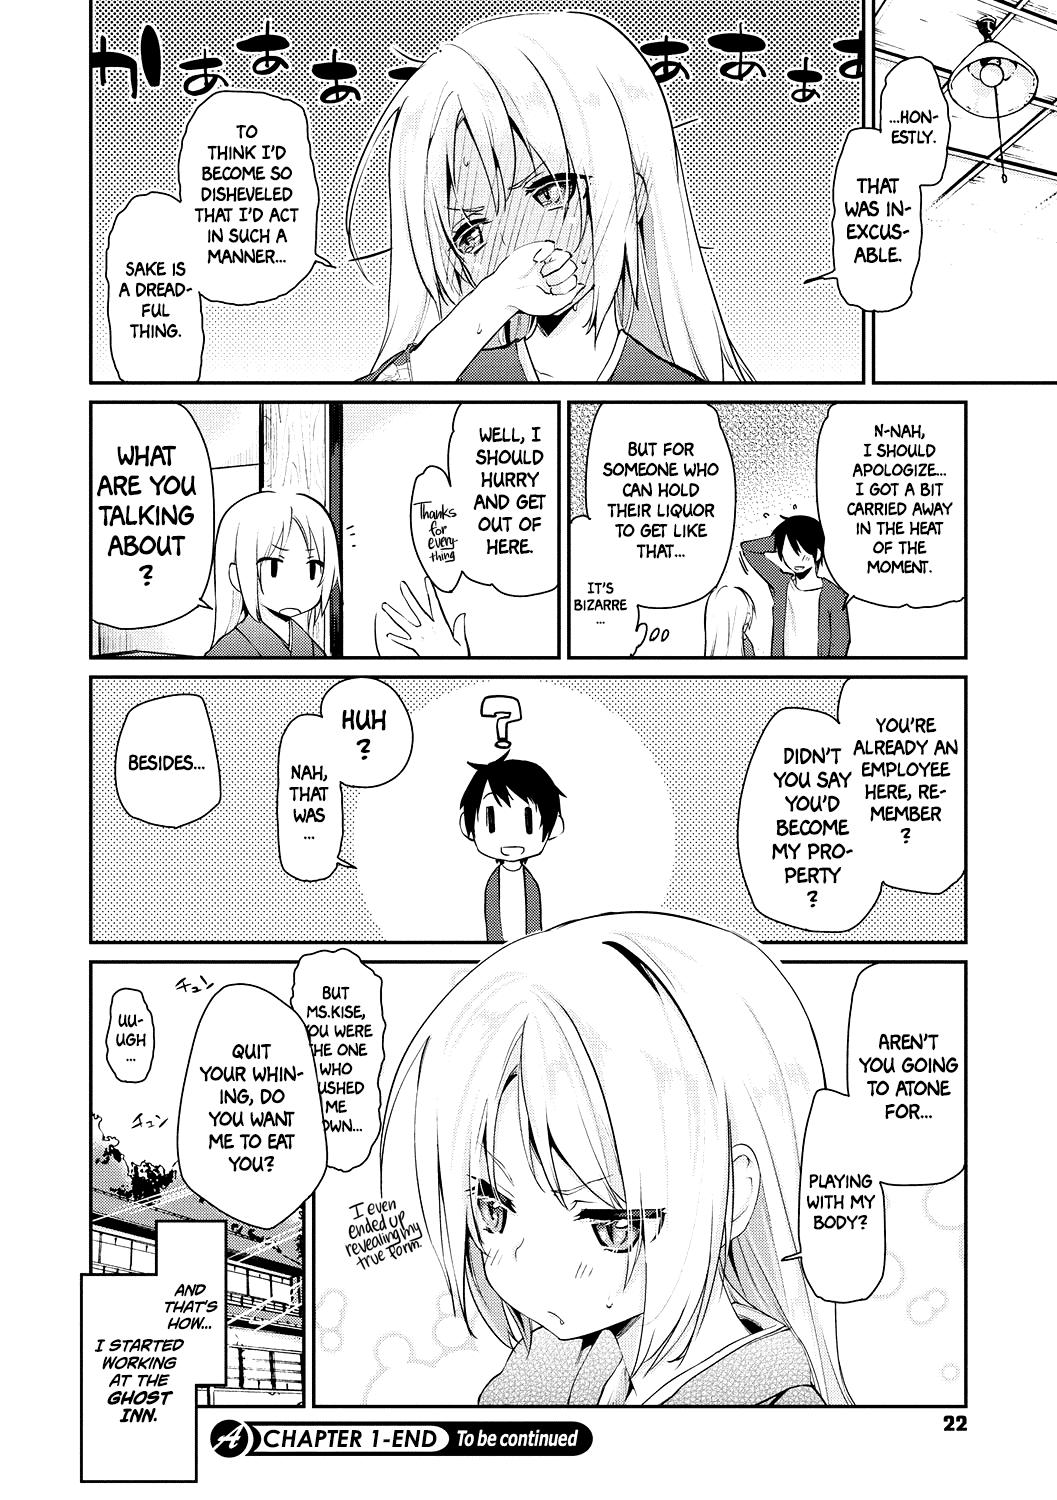 Soles Ayakashi-kan e Youkoso! Ch. 1 Jap - Page 20